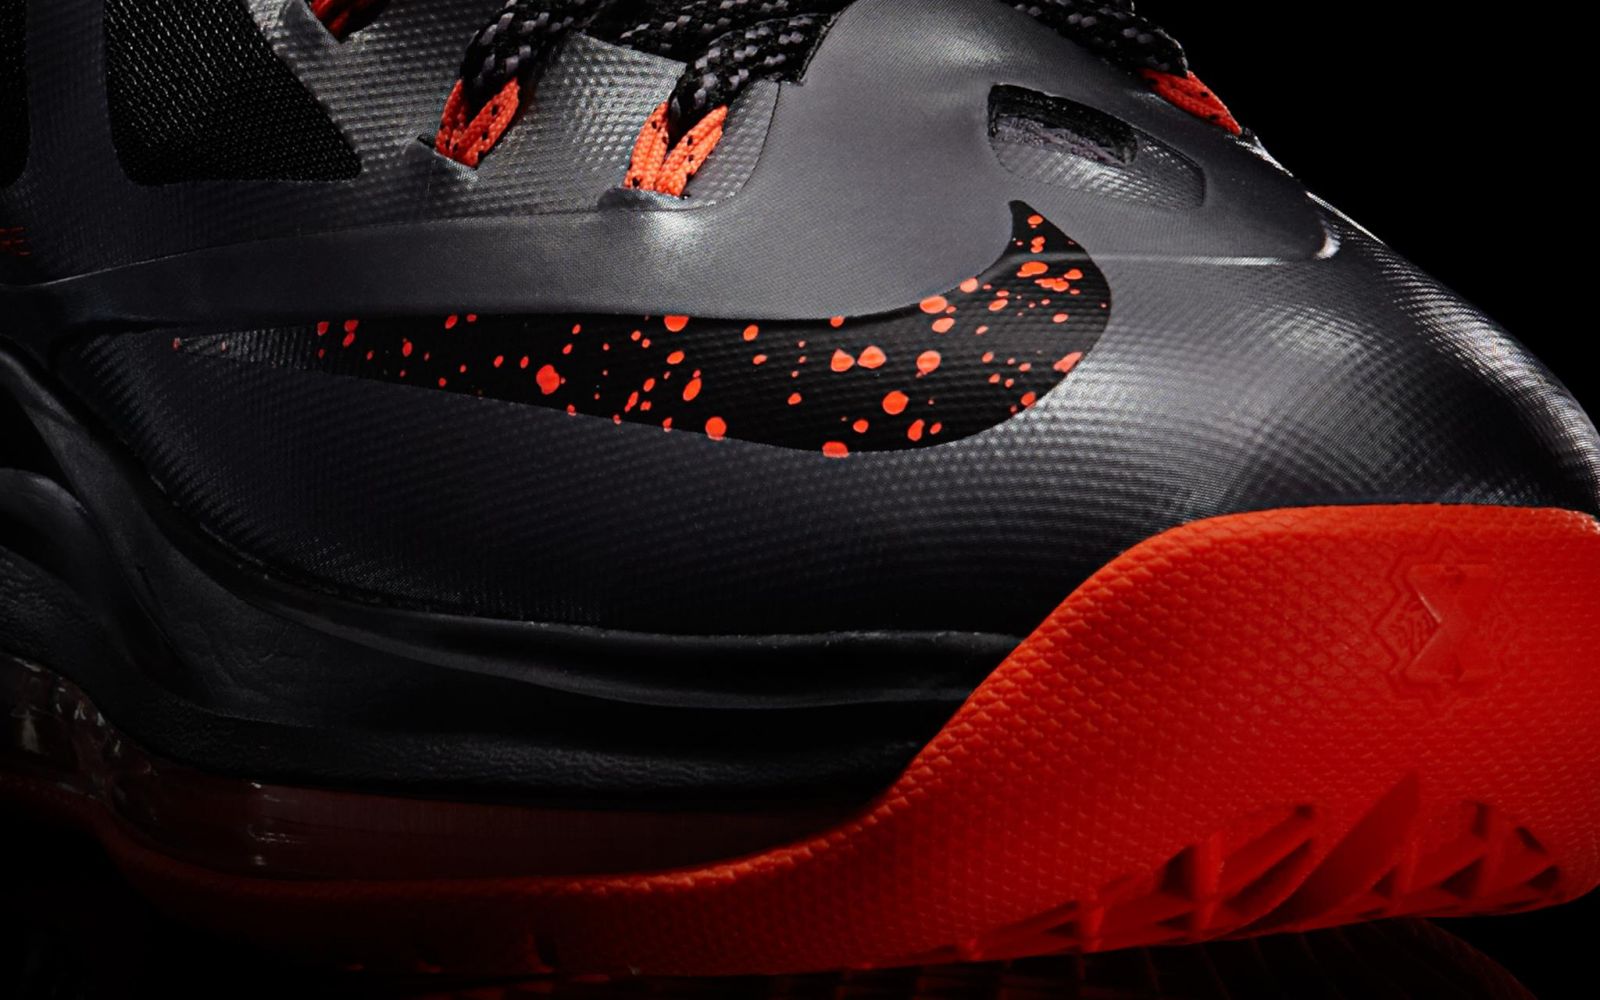 Nike LeBron X (10) 'Lava' - Official Images